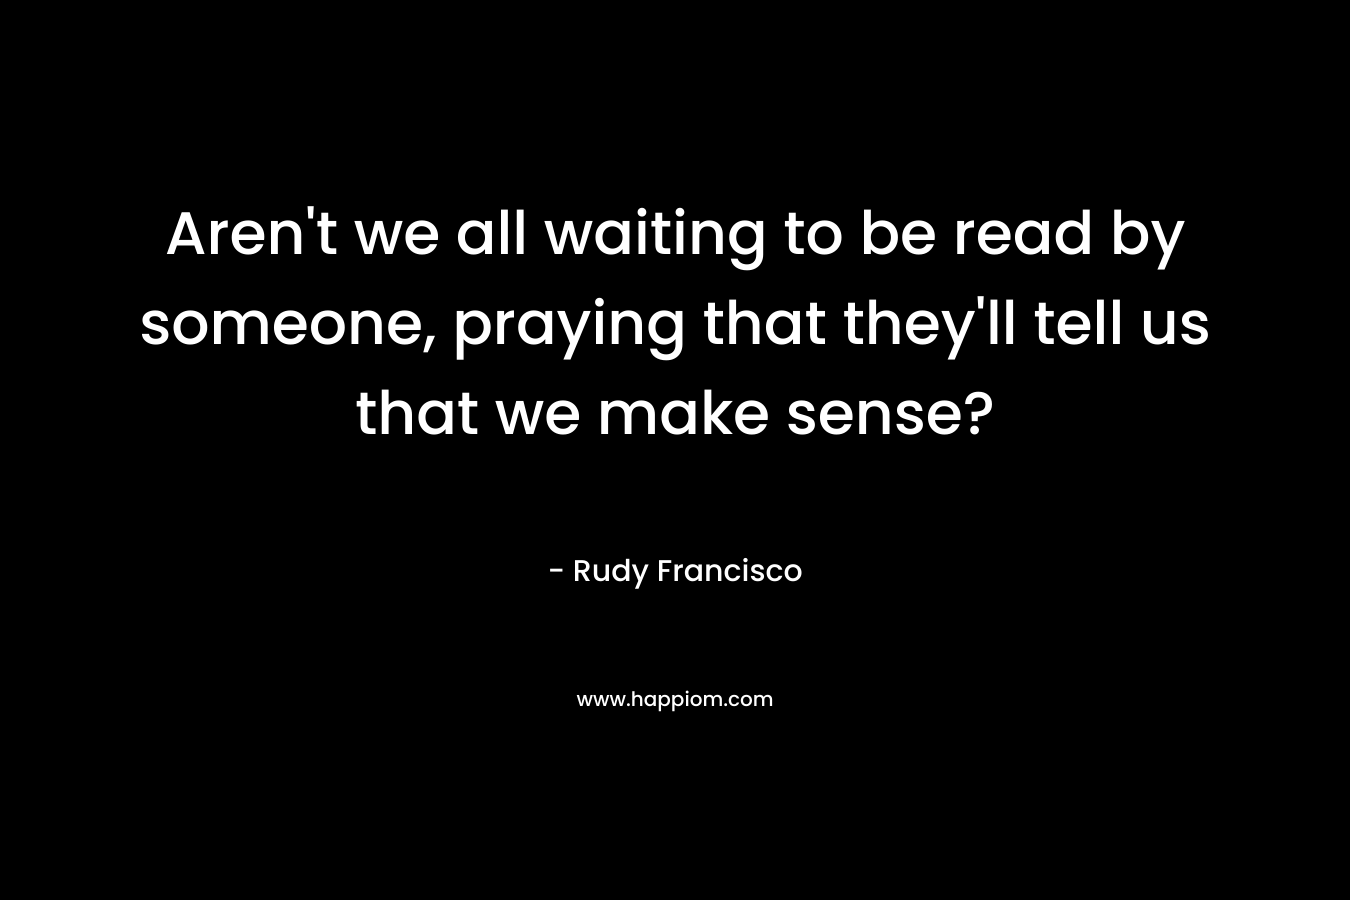 Aren't we all waiting to be read by someone, praying that they'll tell us that we make sense?